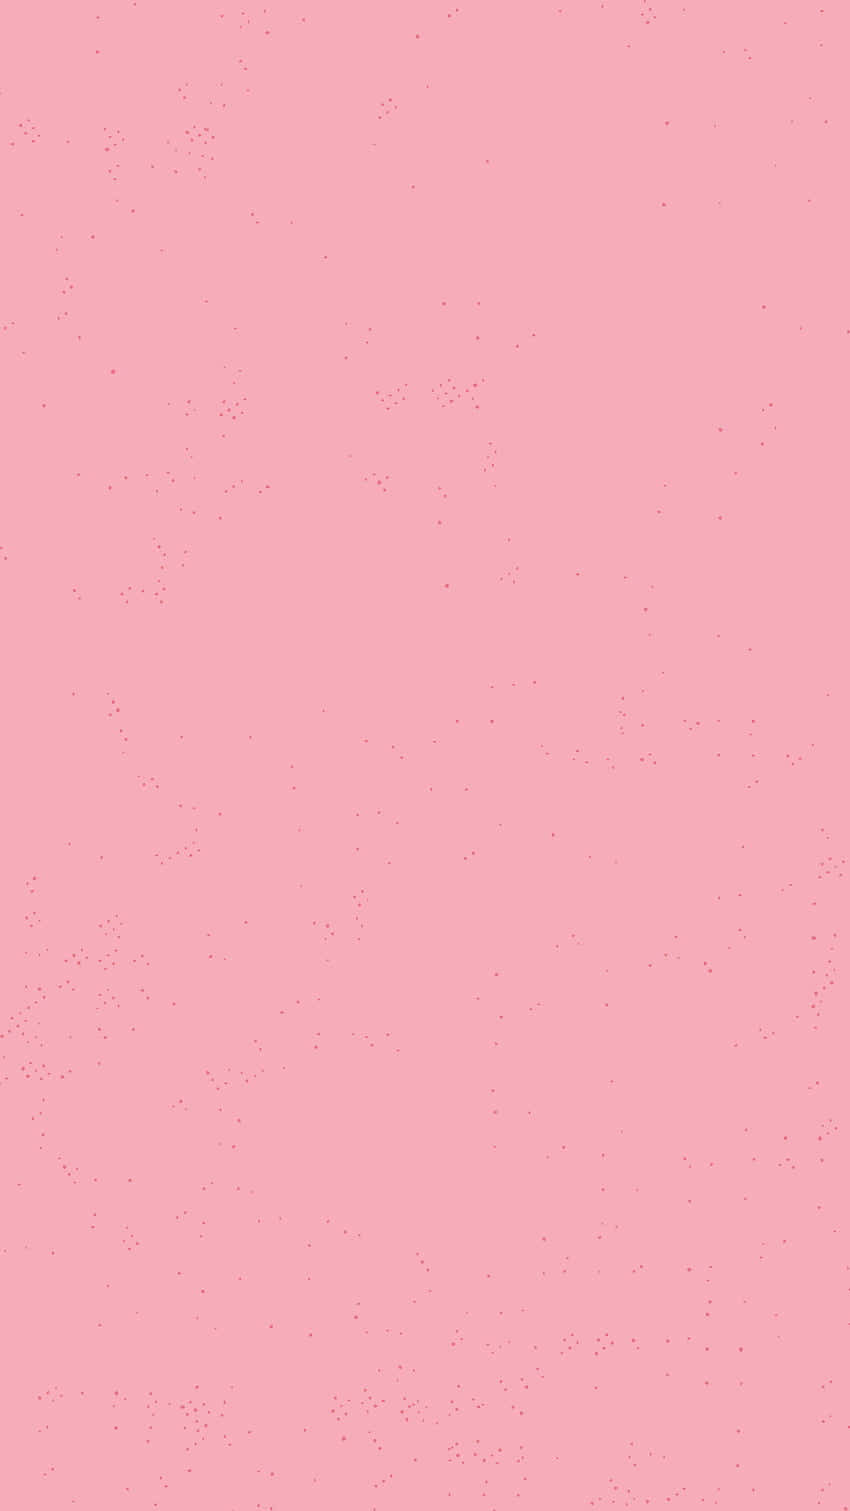 A Pink Background With A White Background